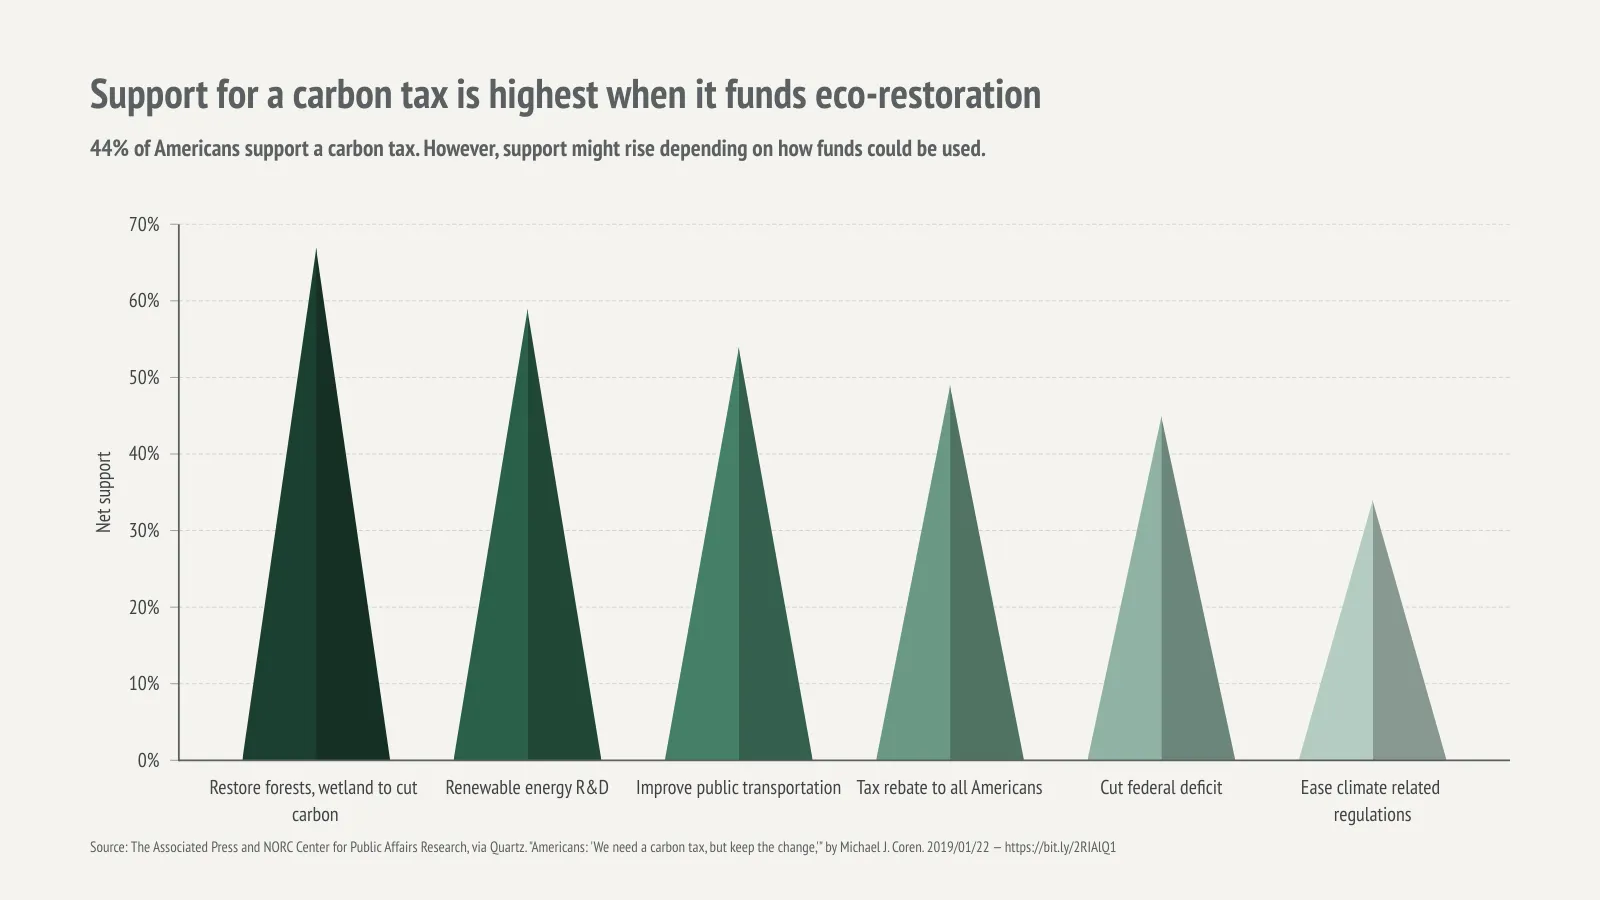 Triangle Bar Chart example: Support for a carbon tax is highest when it funds eco-restoration